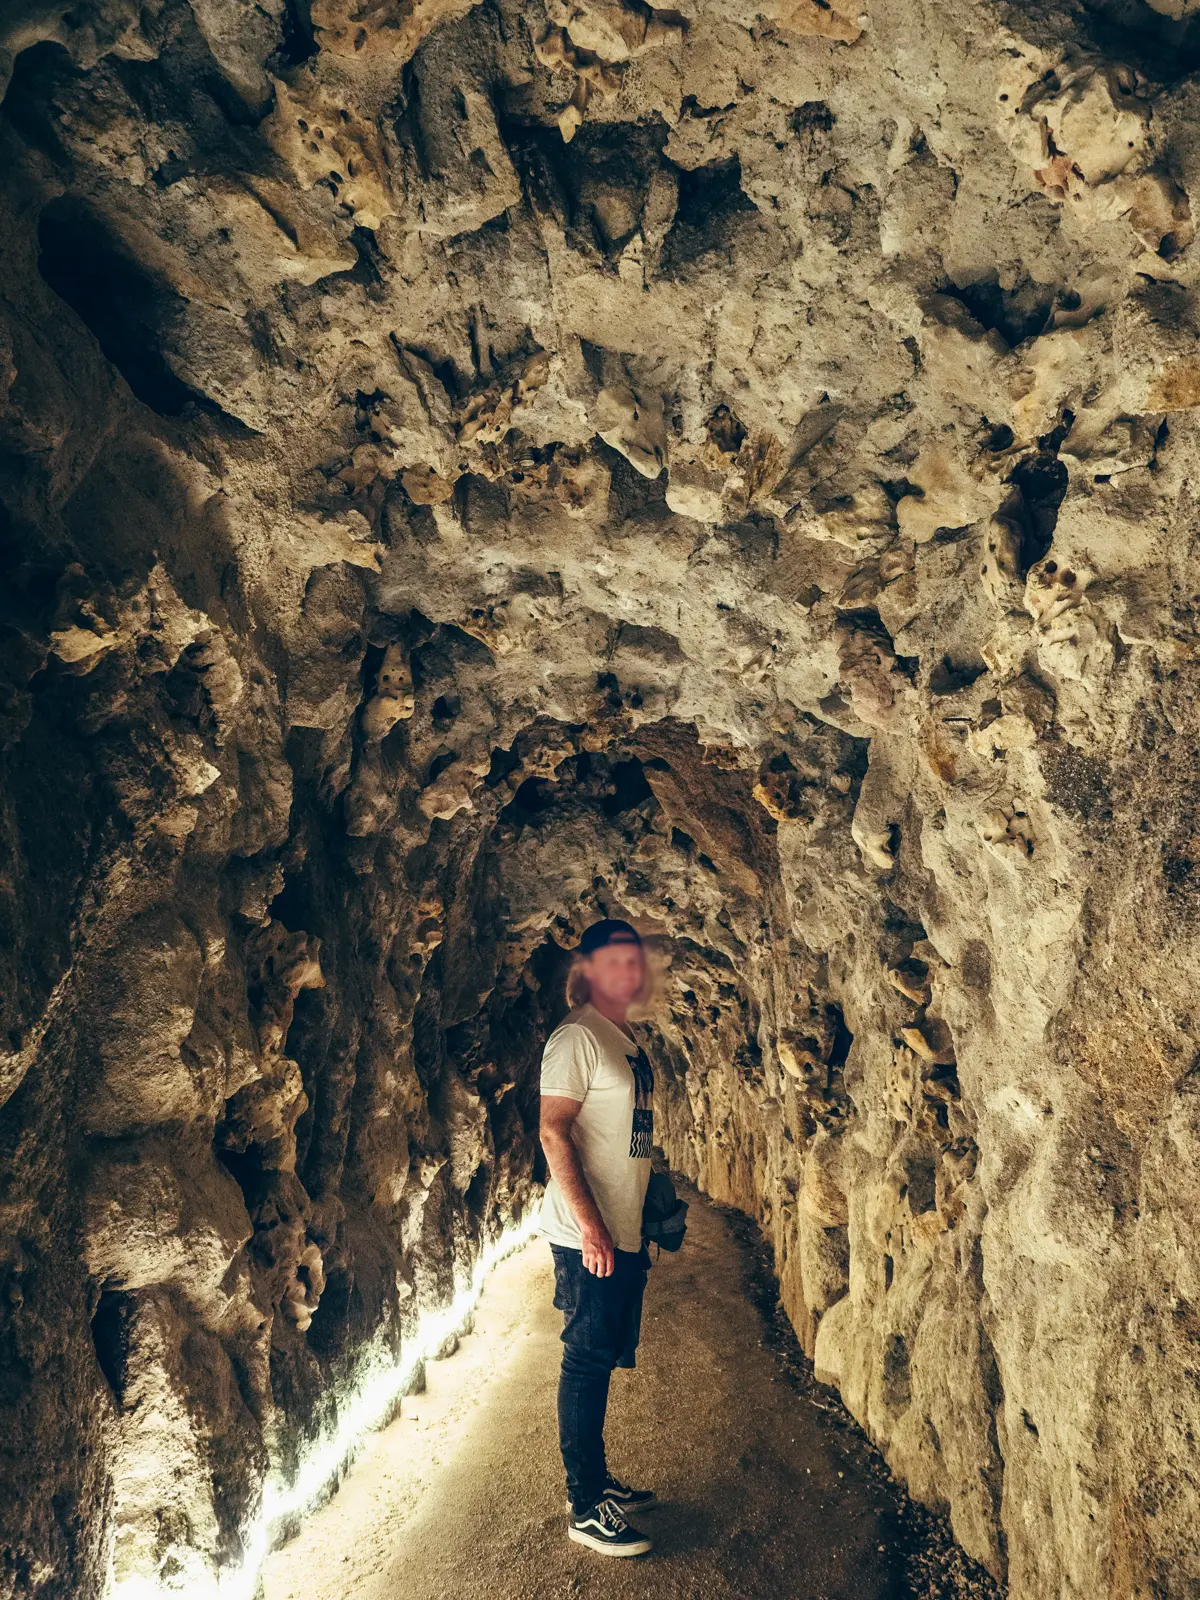 Man in a white t-shirt and black pants walking though a stone tunnel under Quinta da Regaleira.